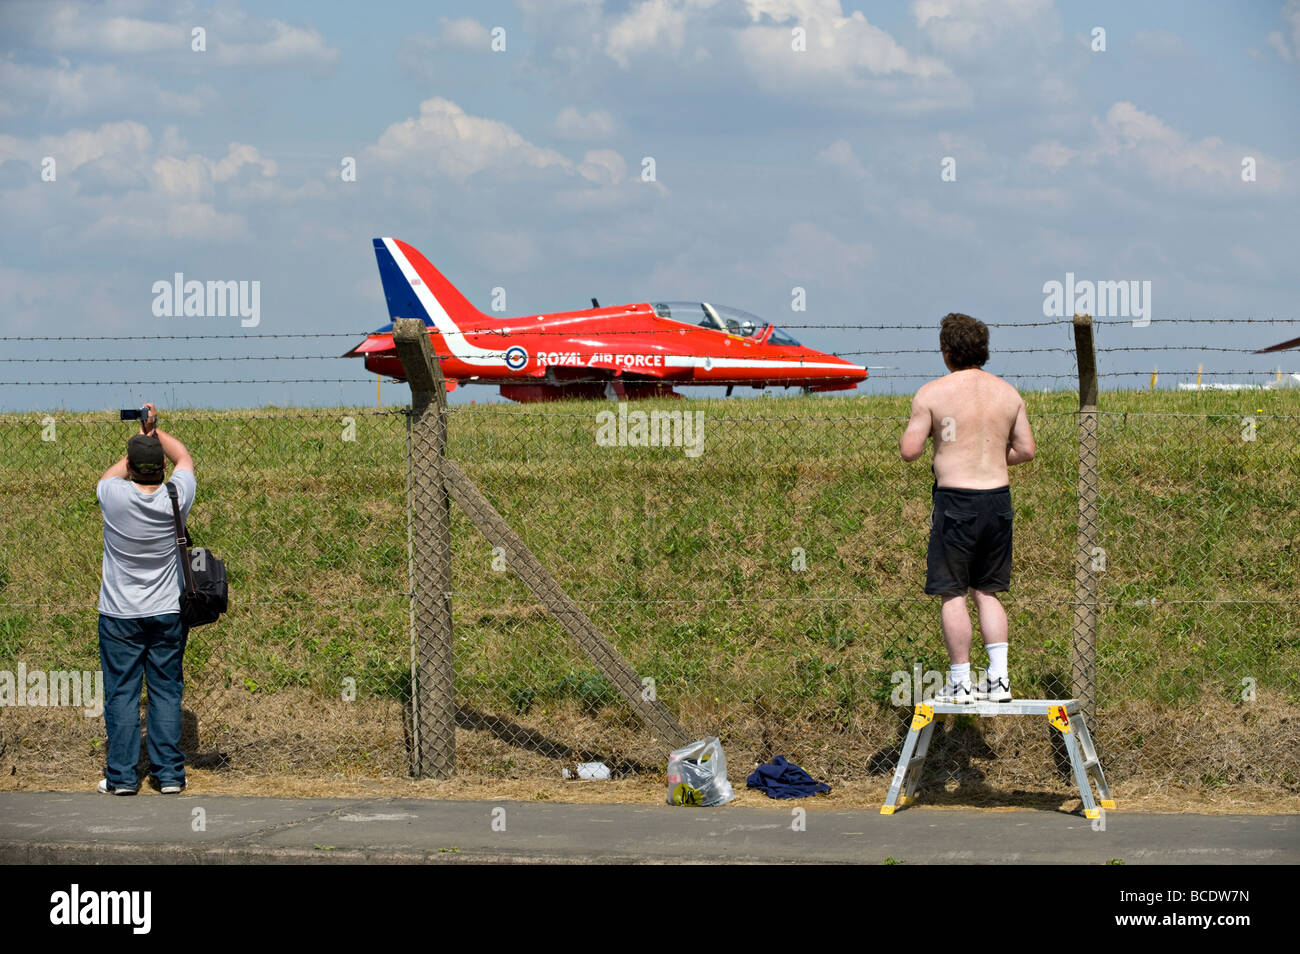 Enthusiasts watch the BAE Hawk aircraft of the RAF's aerobatic team "The Red Arrows" at Biggin Hill, England, UK Stock Photo